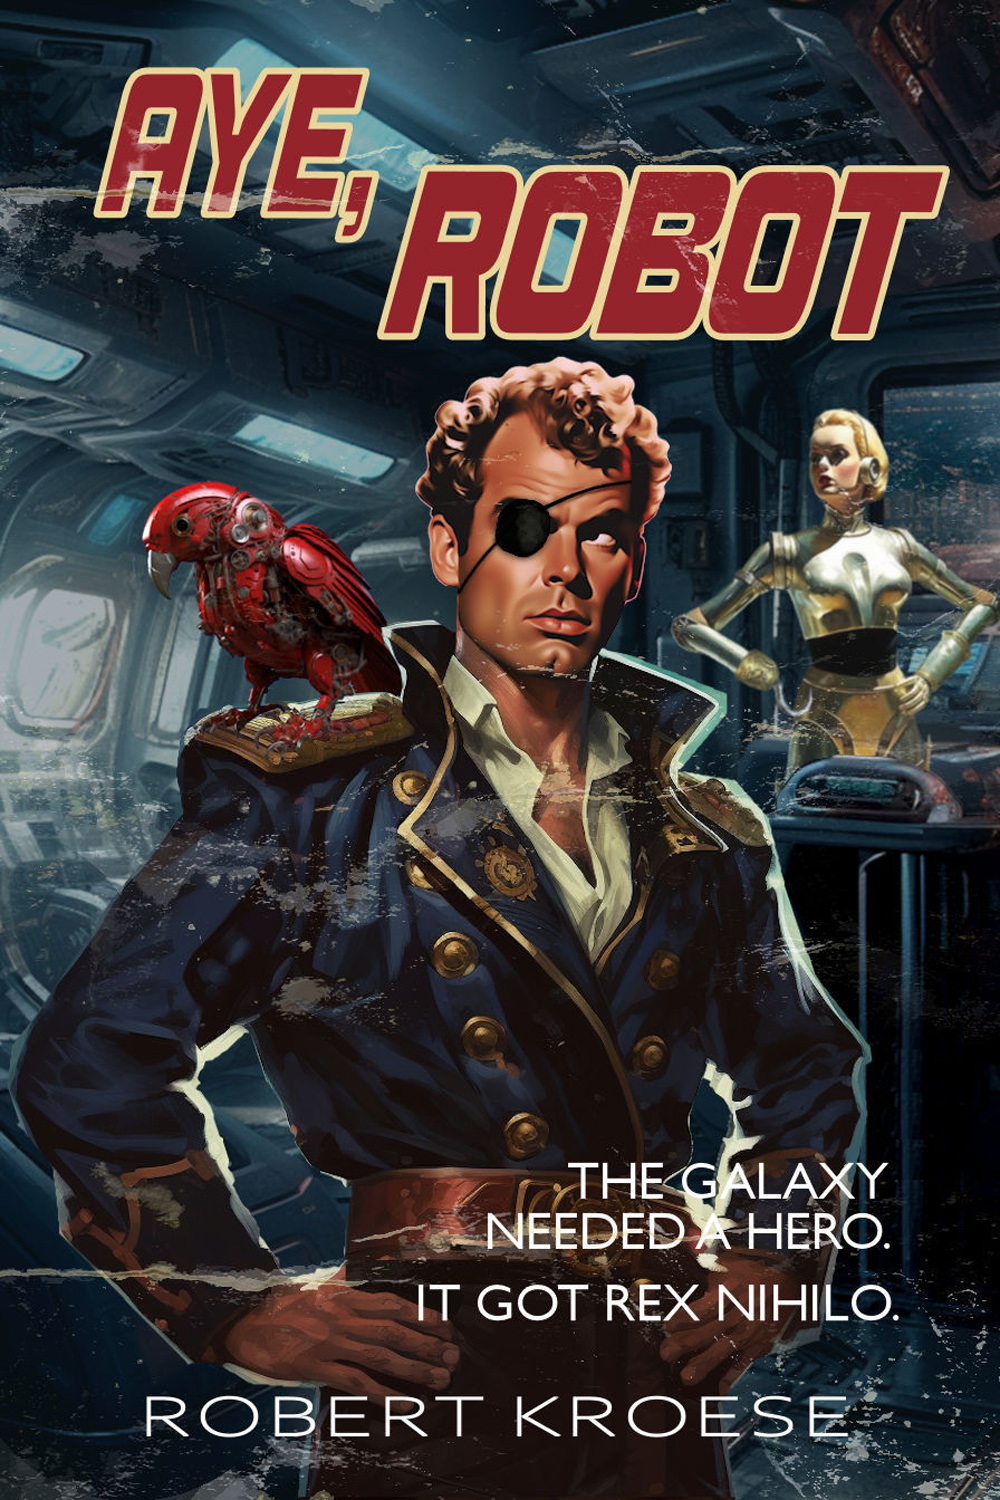 Rex Nihilo stands with arms akimbo and a mechanical parrot on his shoulder, while a female robot looks on behind him on the cover of 'Aye, Robot.'